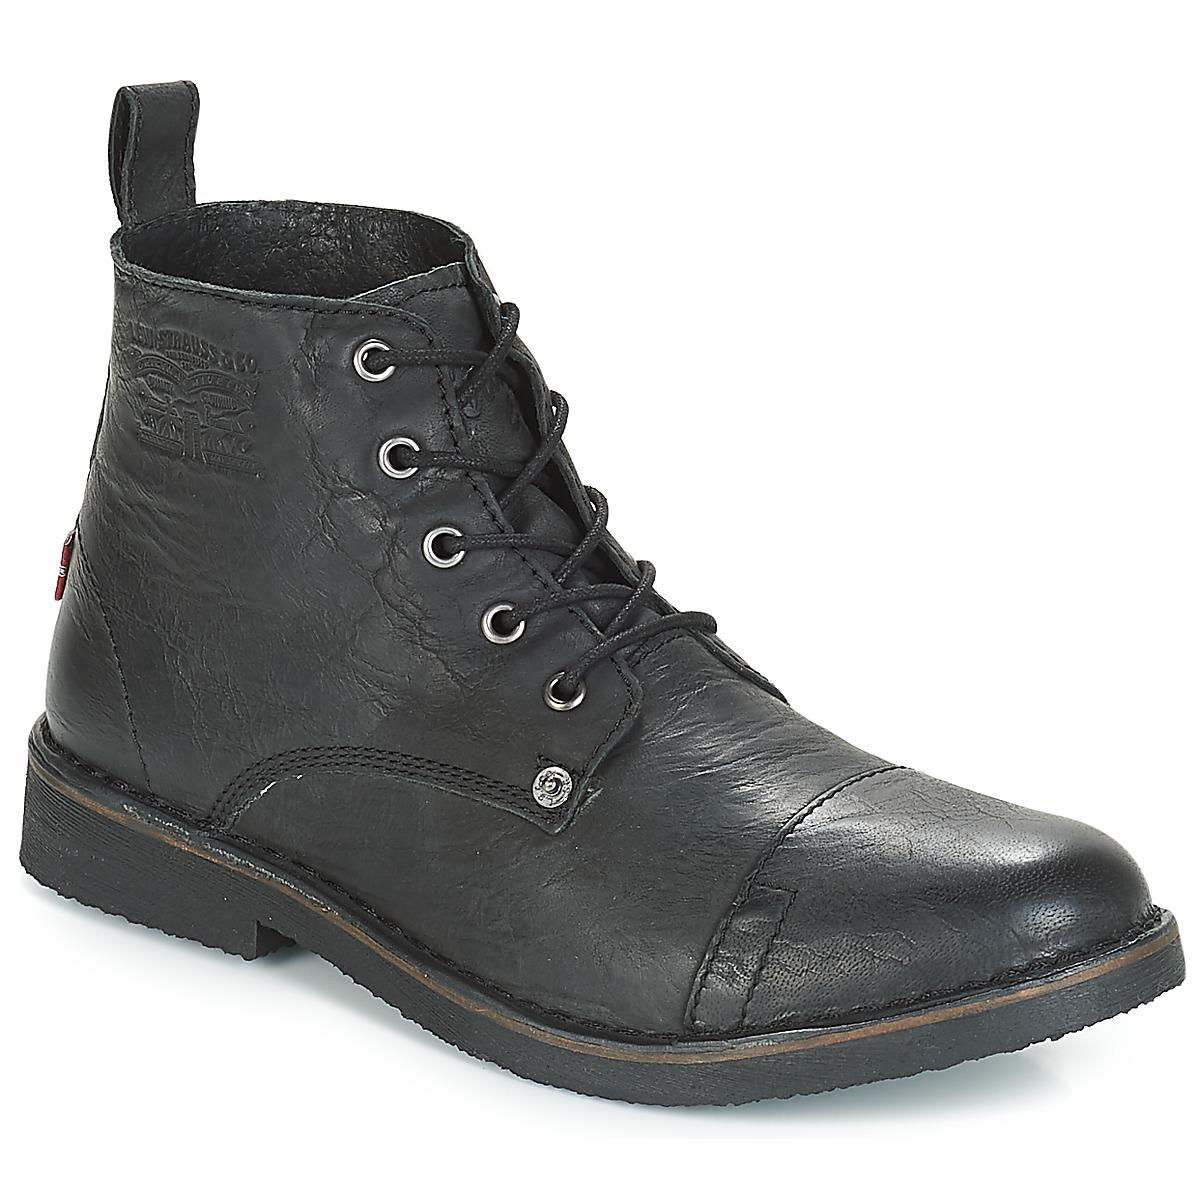 levi's track boots